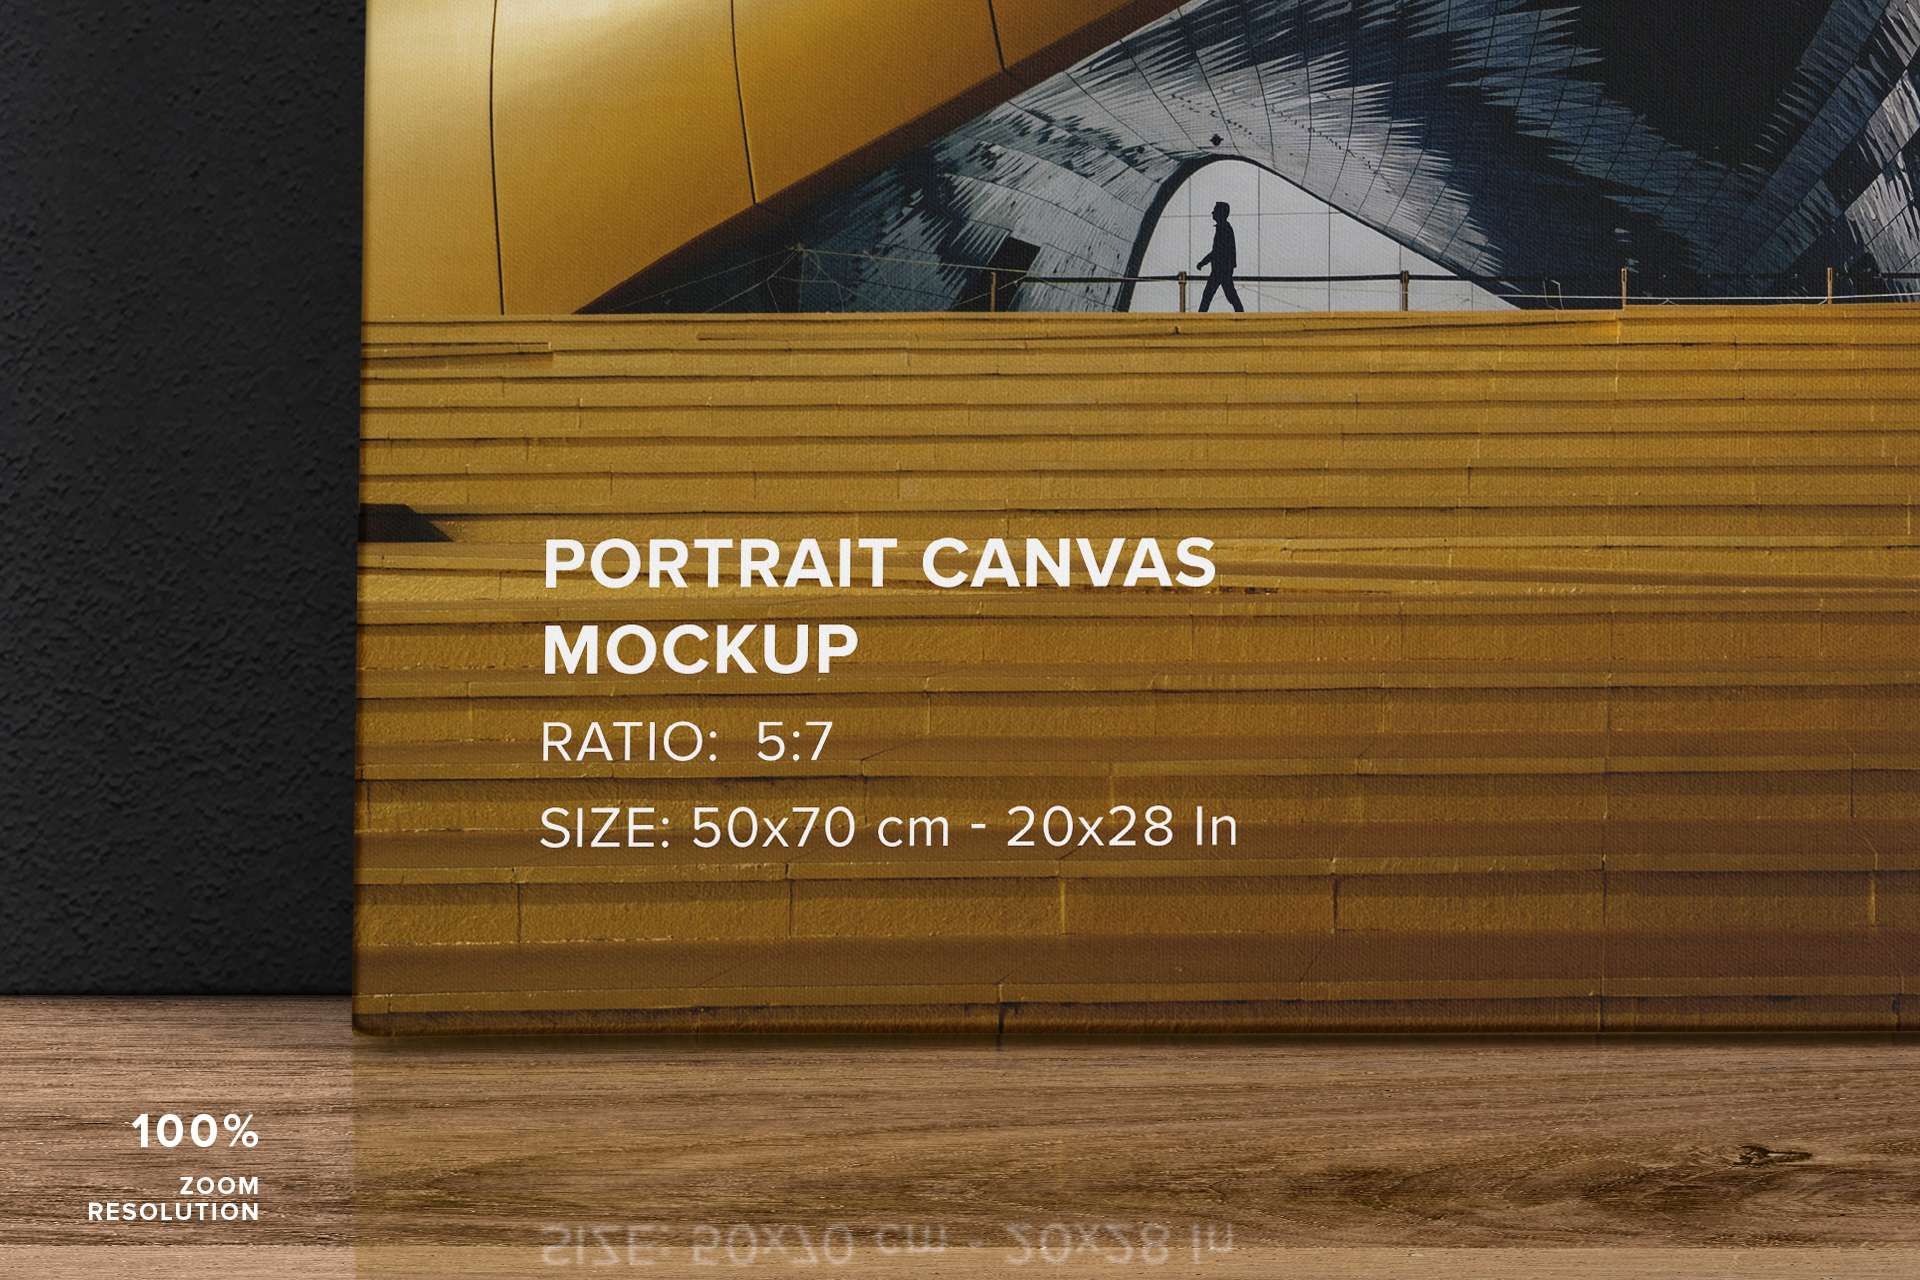 Front Leaning Canvas Ratio 5x7 Mockup